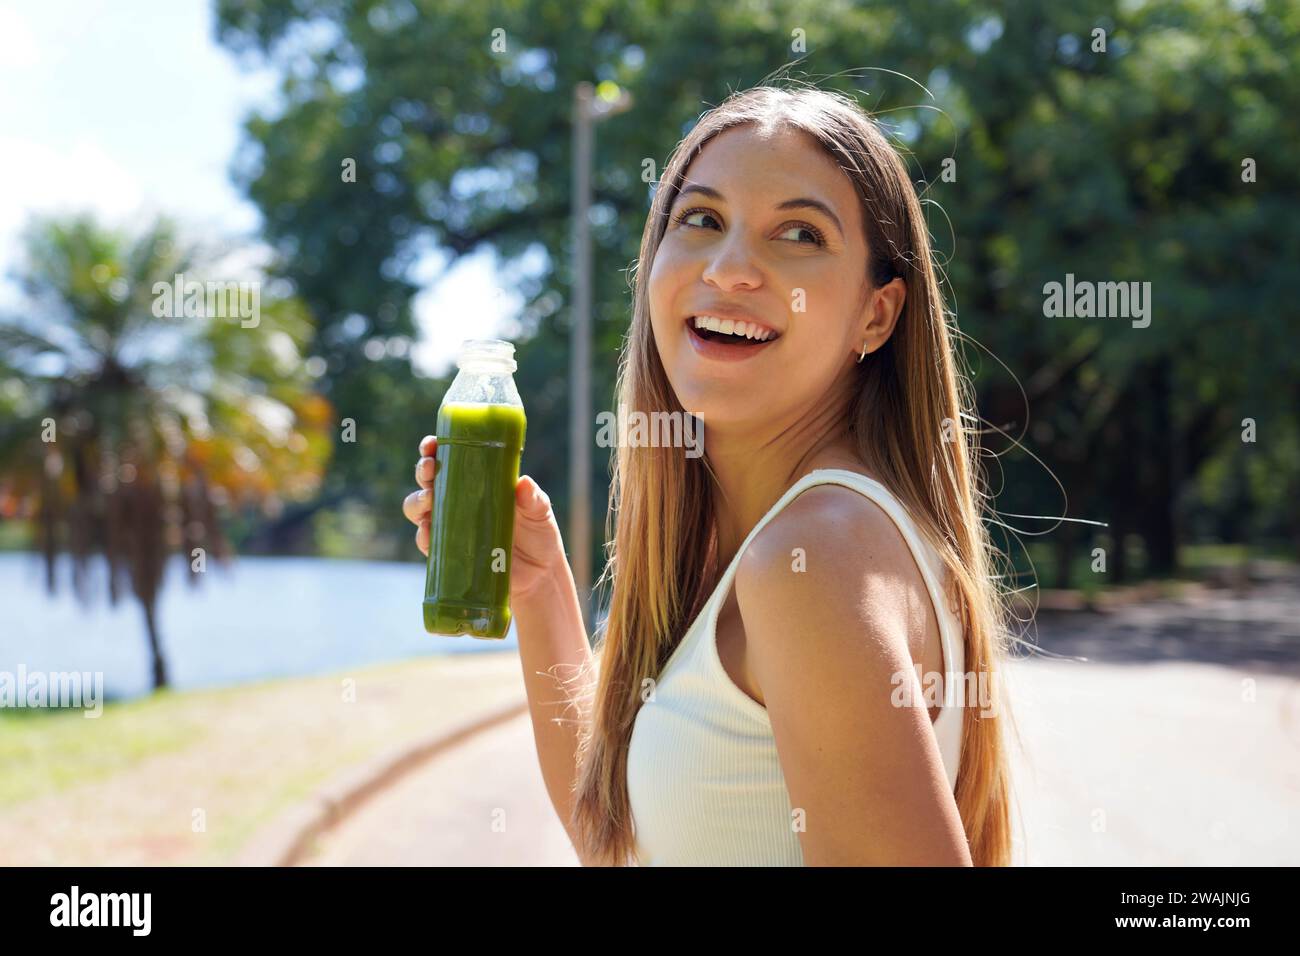 Attractive Brazilian Sporty Girl Holding Green Smoothie Detox Juice Outdoors Stock Photo